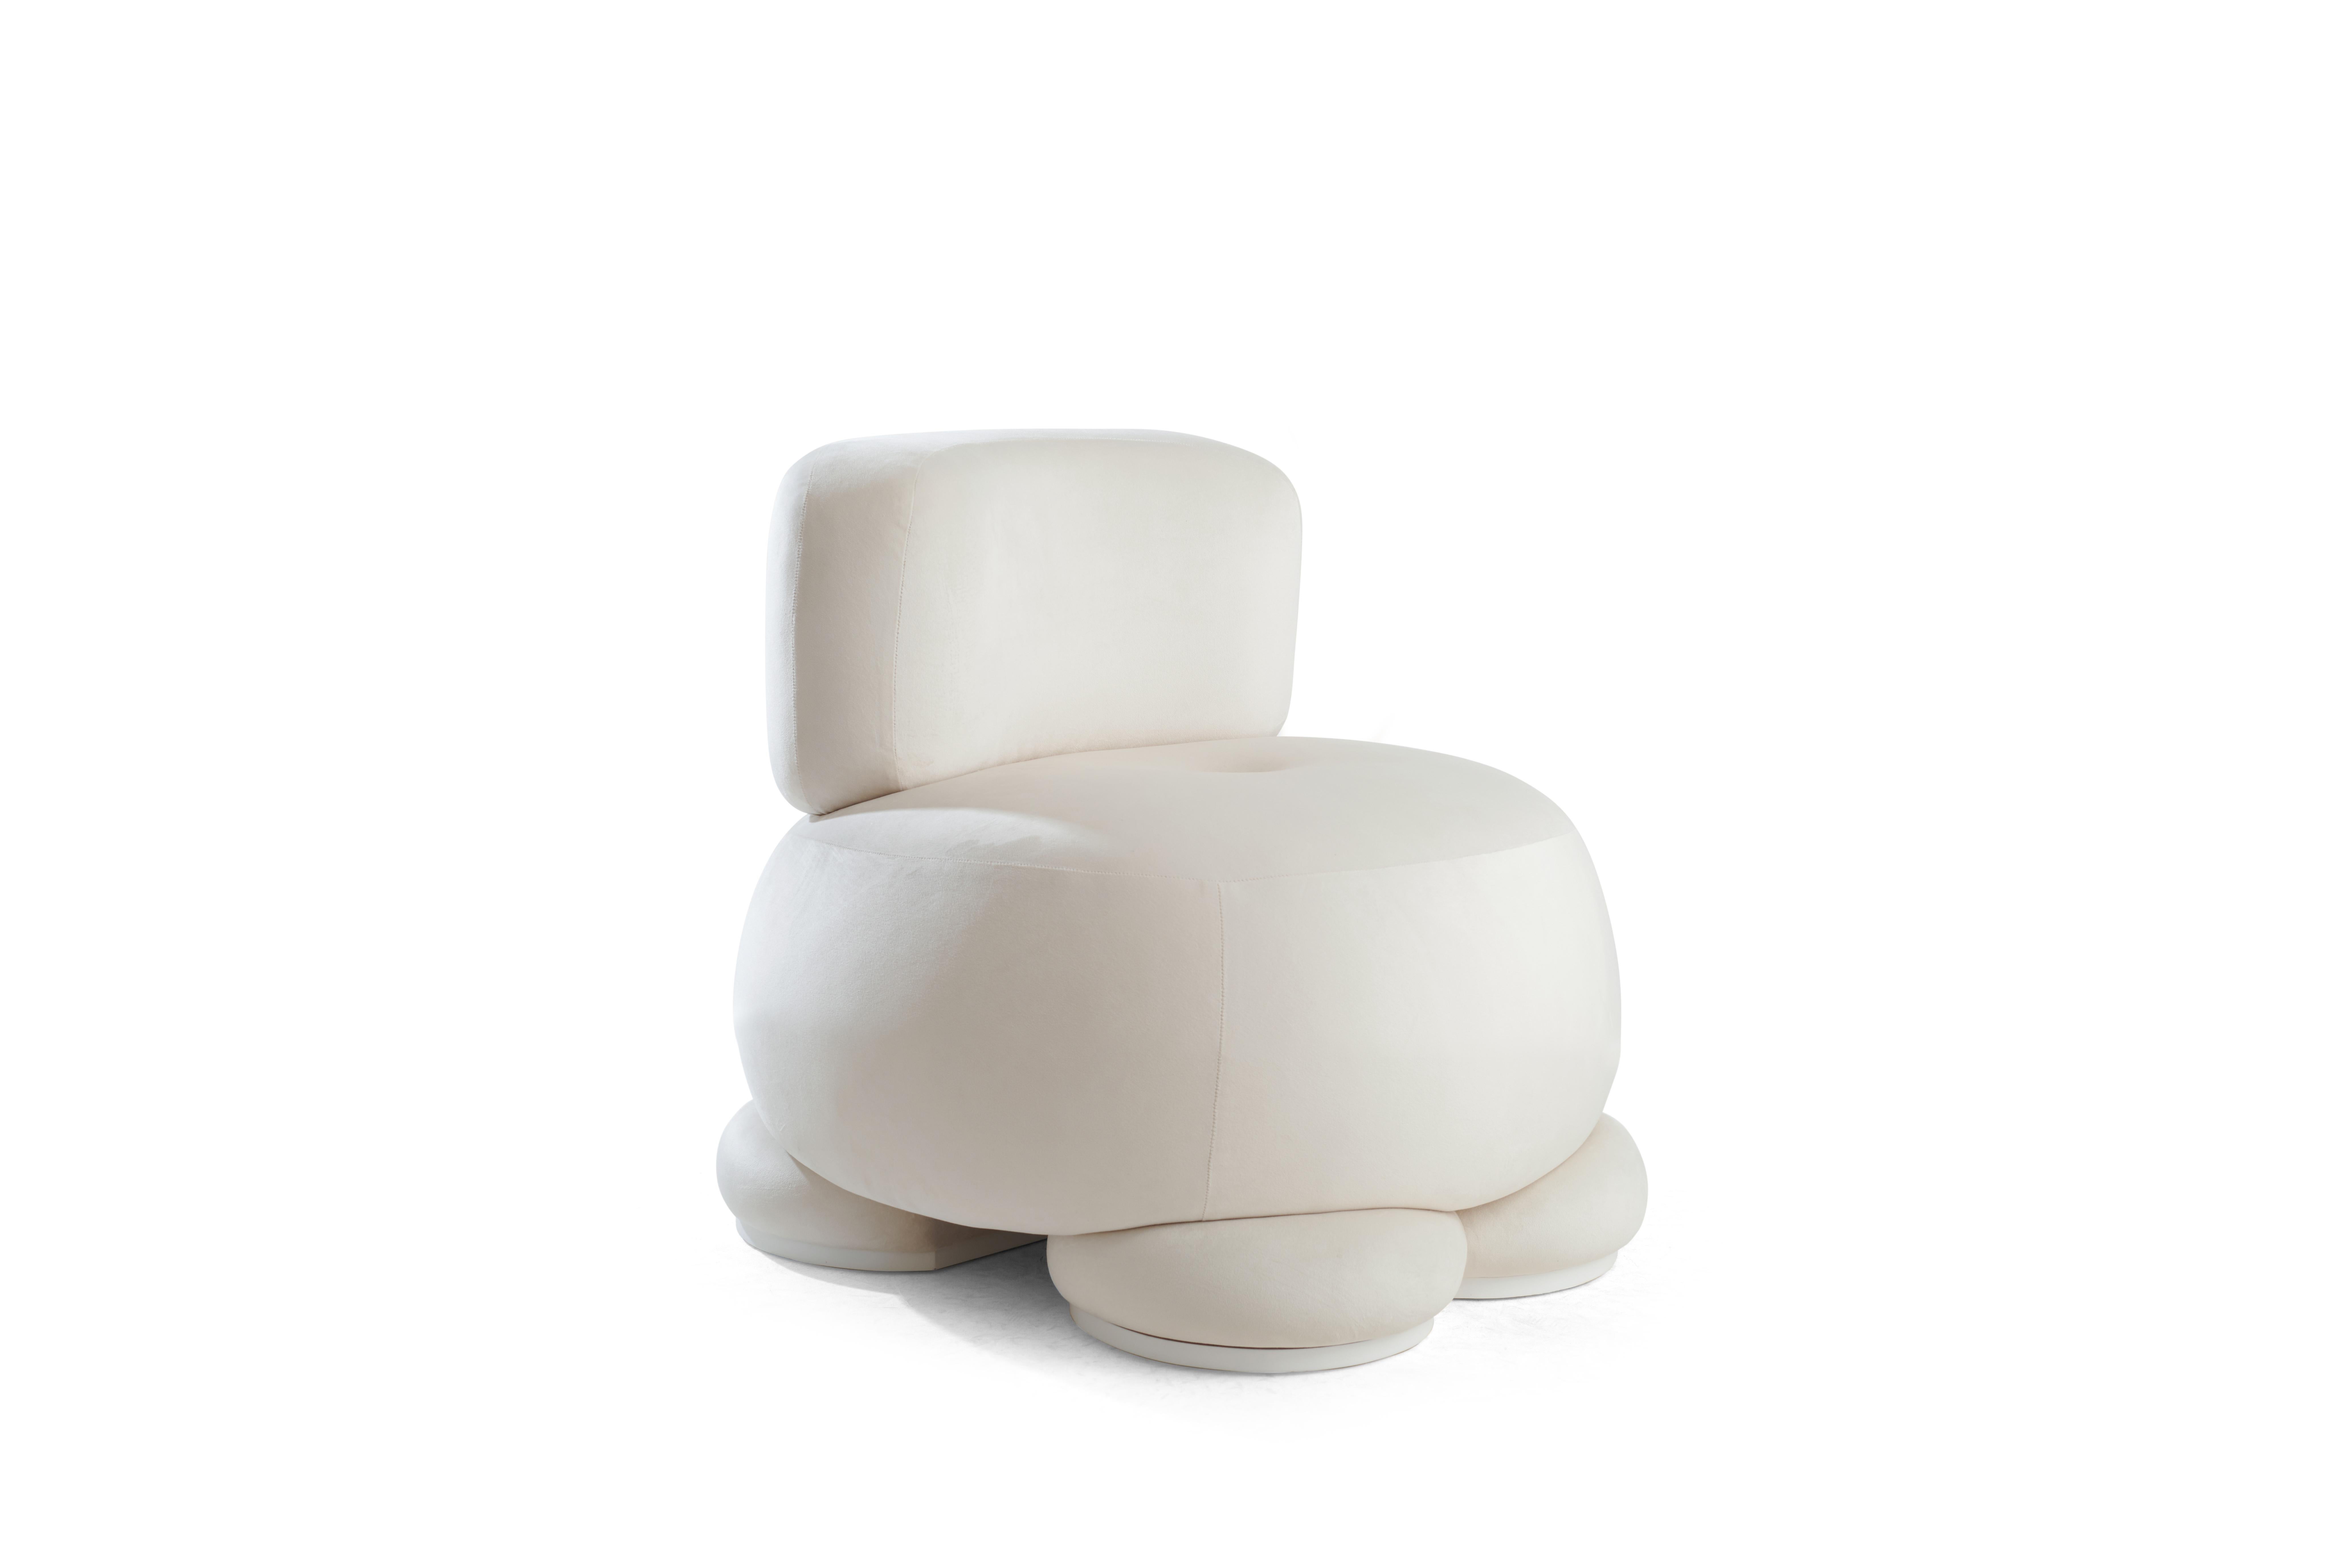 Cloud lounge chair by Melis Tatlicibasi
Materials: Upholstered with white velvet, bottom wood part is off-white lacquered
Dimensions: W 65 x D 65 x H 75 cm

The Cloud concept was developed as a dream bringing the far-away clouds from the sky